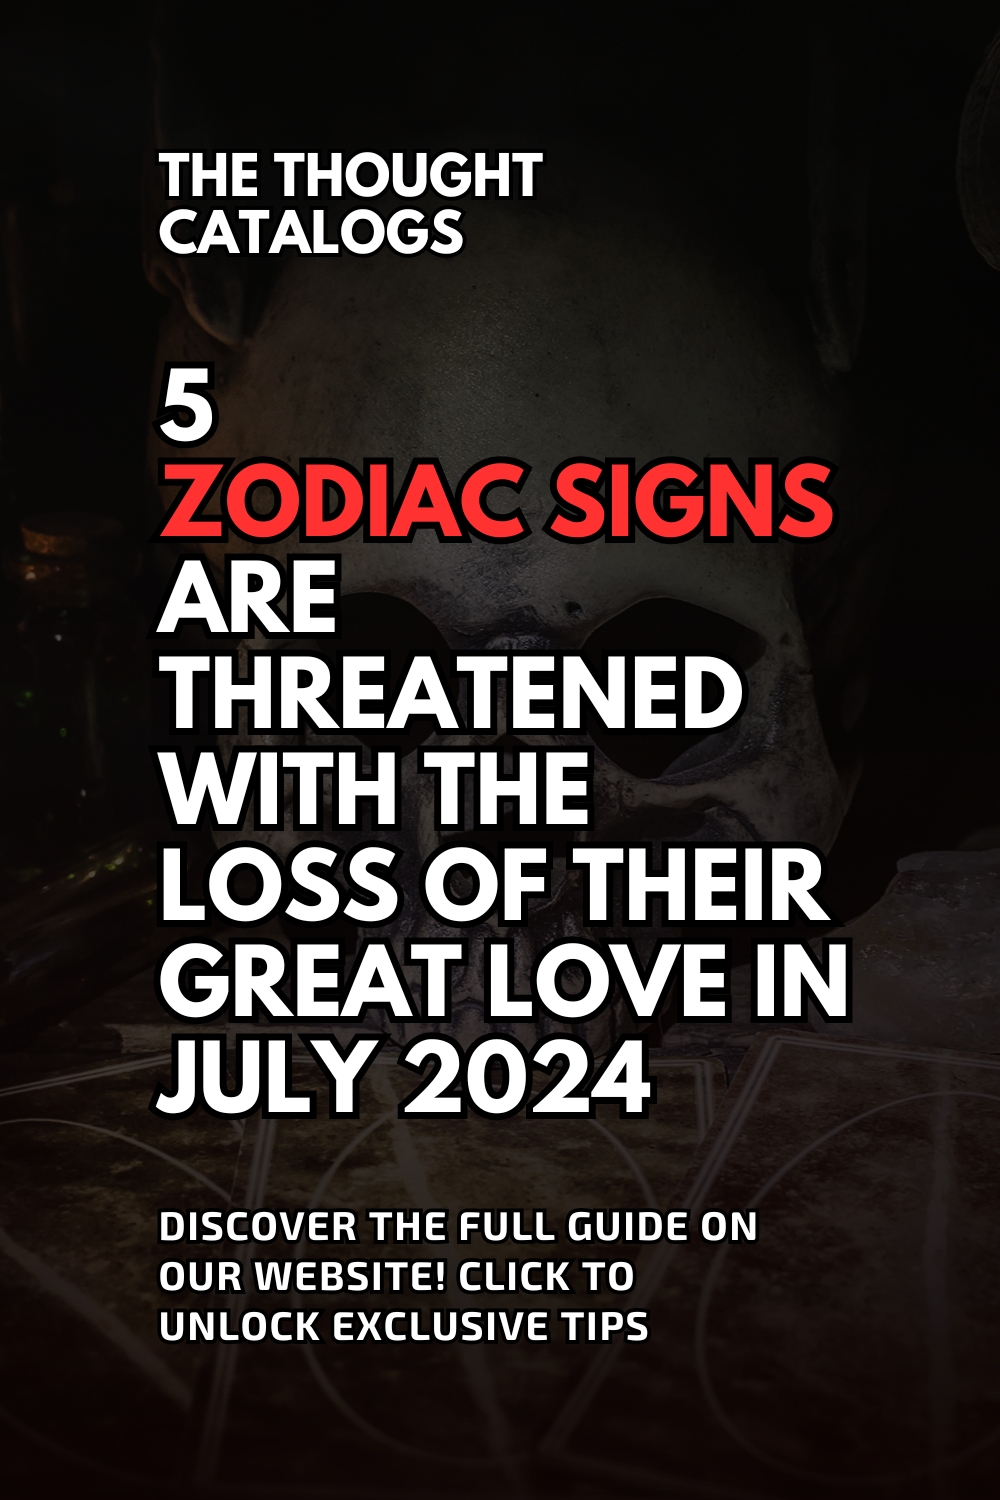 5 Zodiac Signs Are Threatened With The Loss Of Their Great Love In July 2024